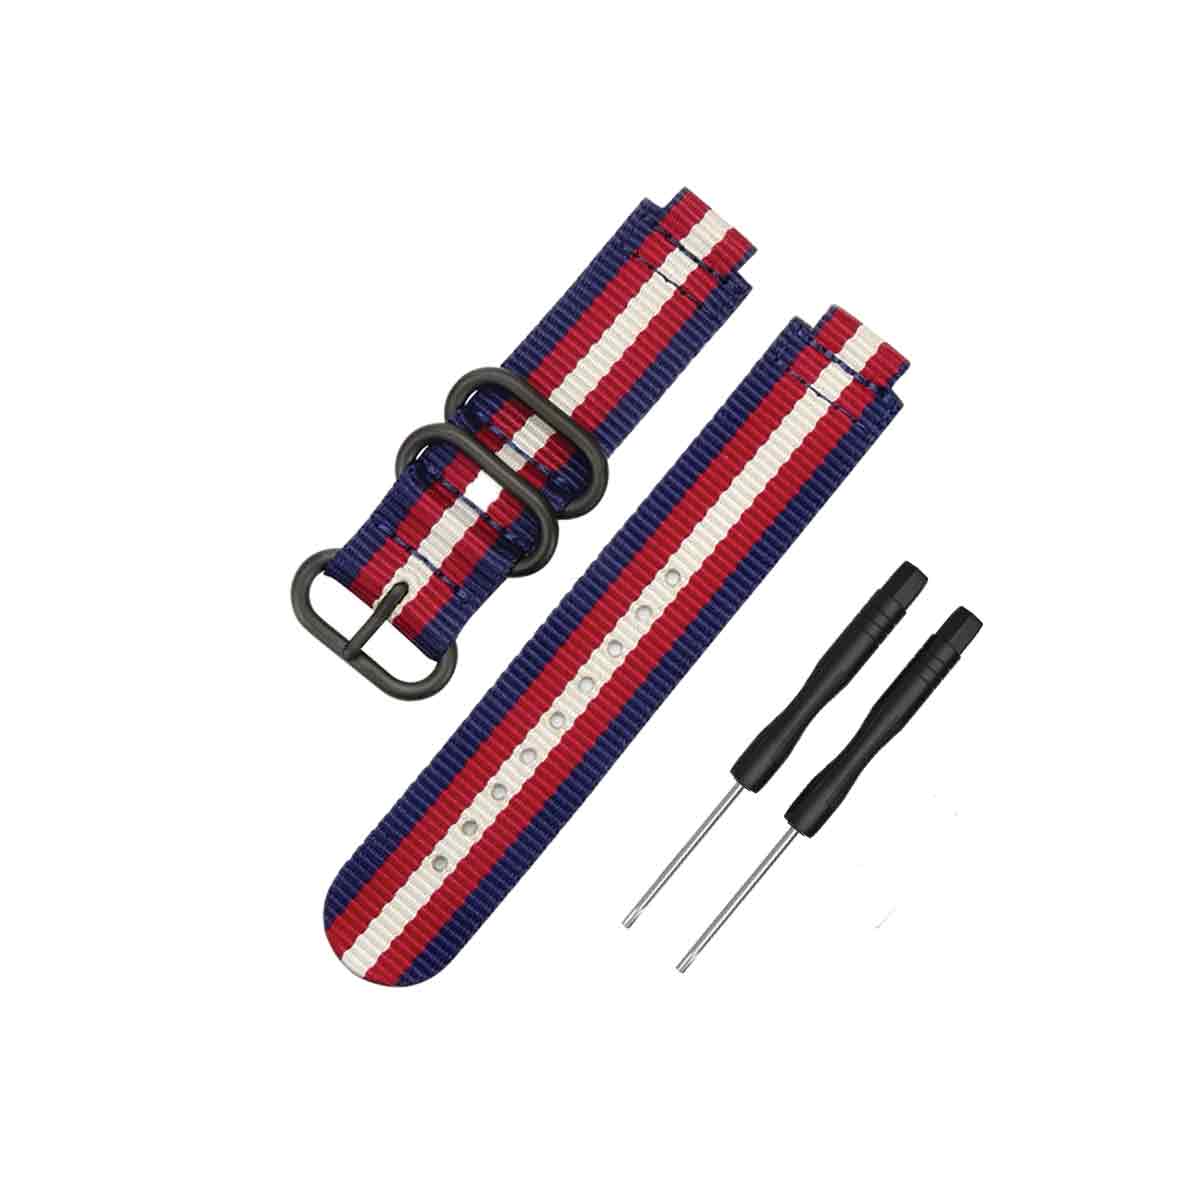 NATO Garmin Forerunner 230/235/630/220/620/735 Replacement Bands Blue + Red + Rice White Stripe  